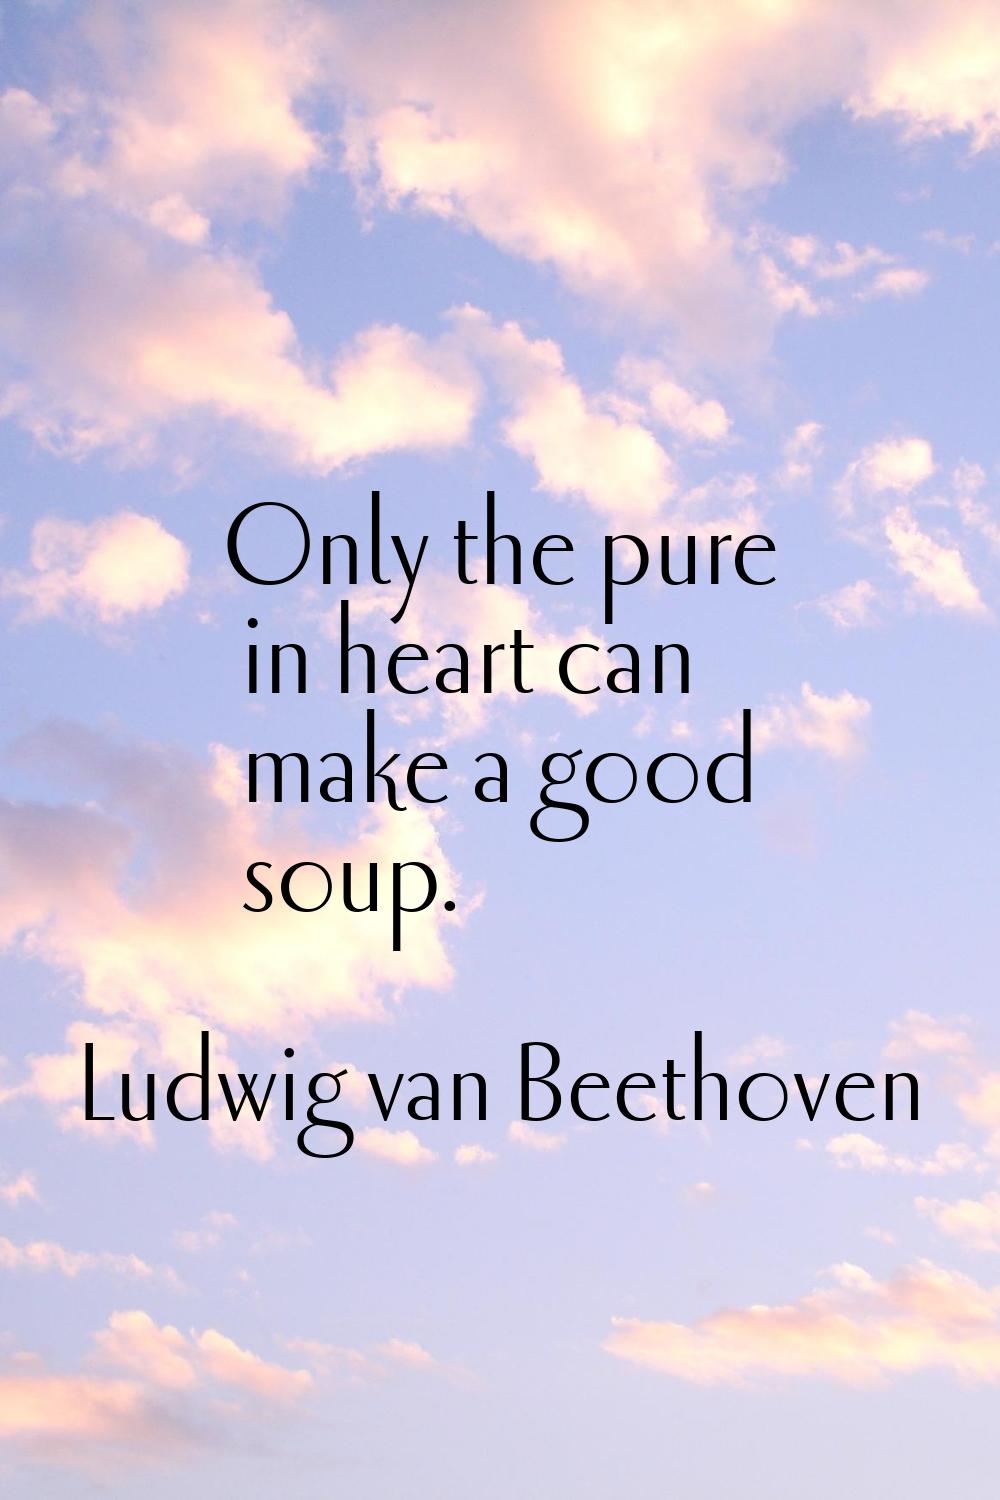 Only the pure in heart can make a good soup.